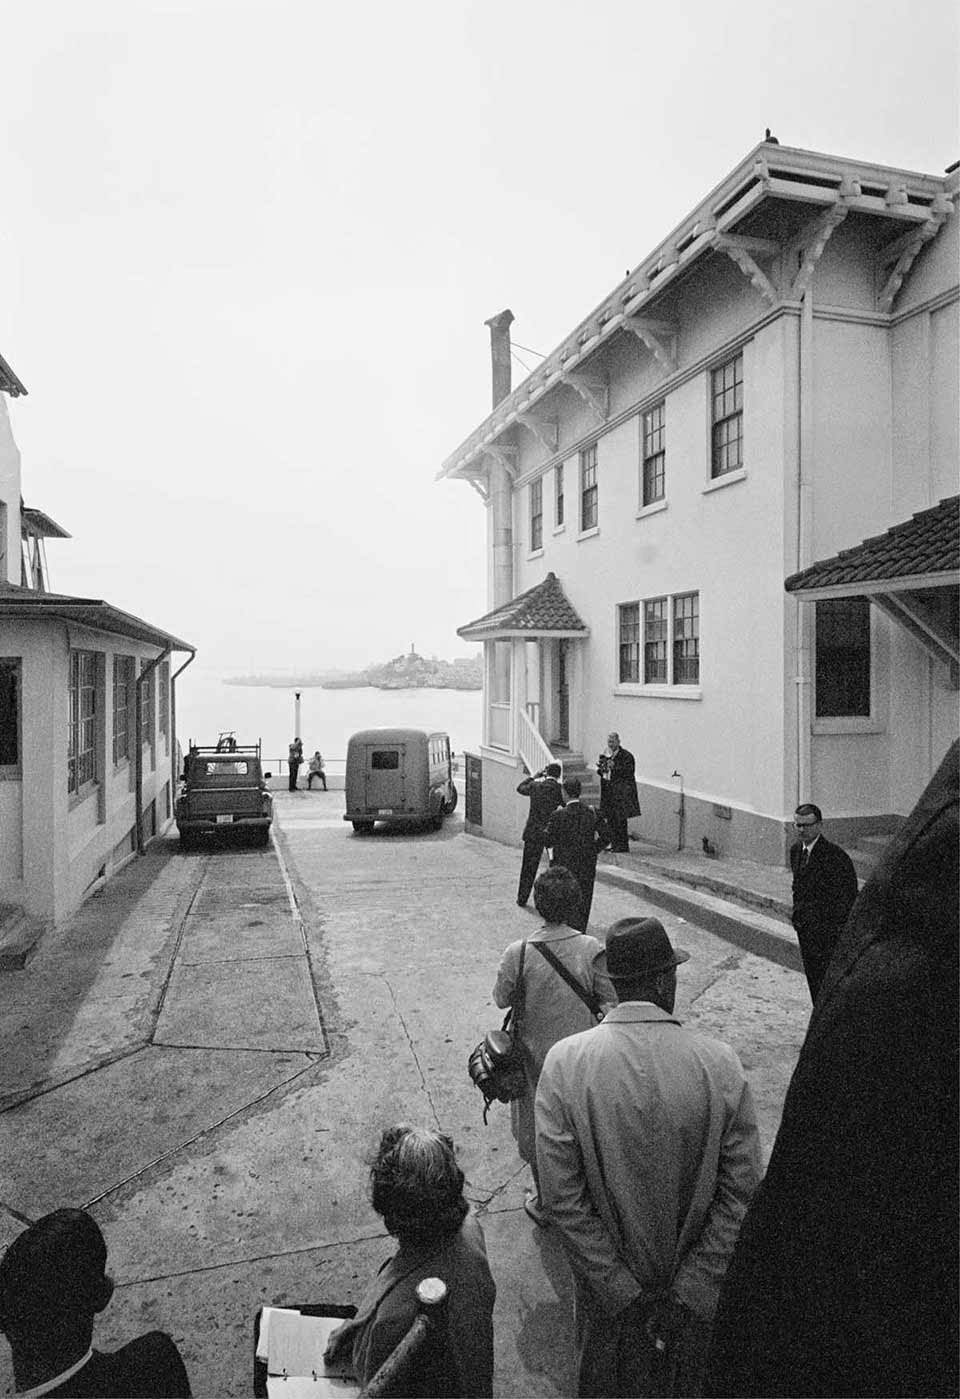 Convict’s Bus - The bus transporting convicts drives to the dock. On the left is the Warden’s House; on the right is the Lighthouse Keepers’ Quarters.